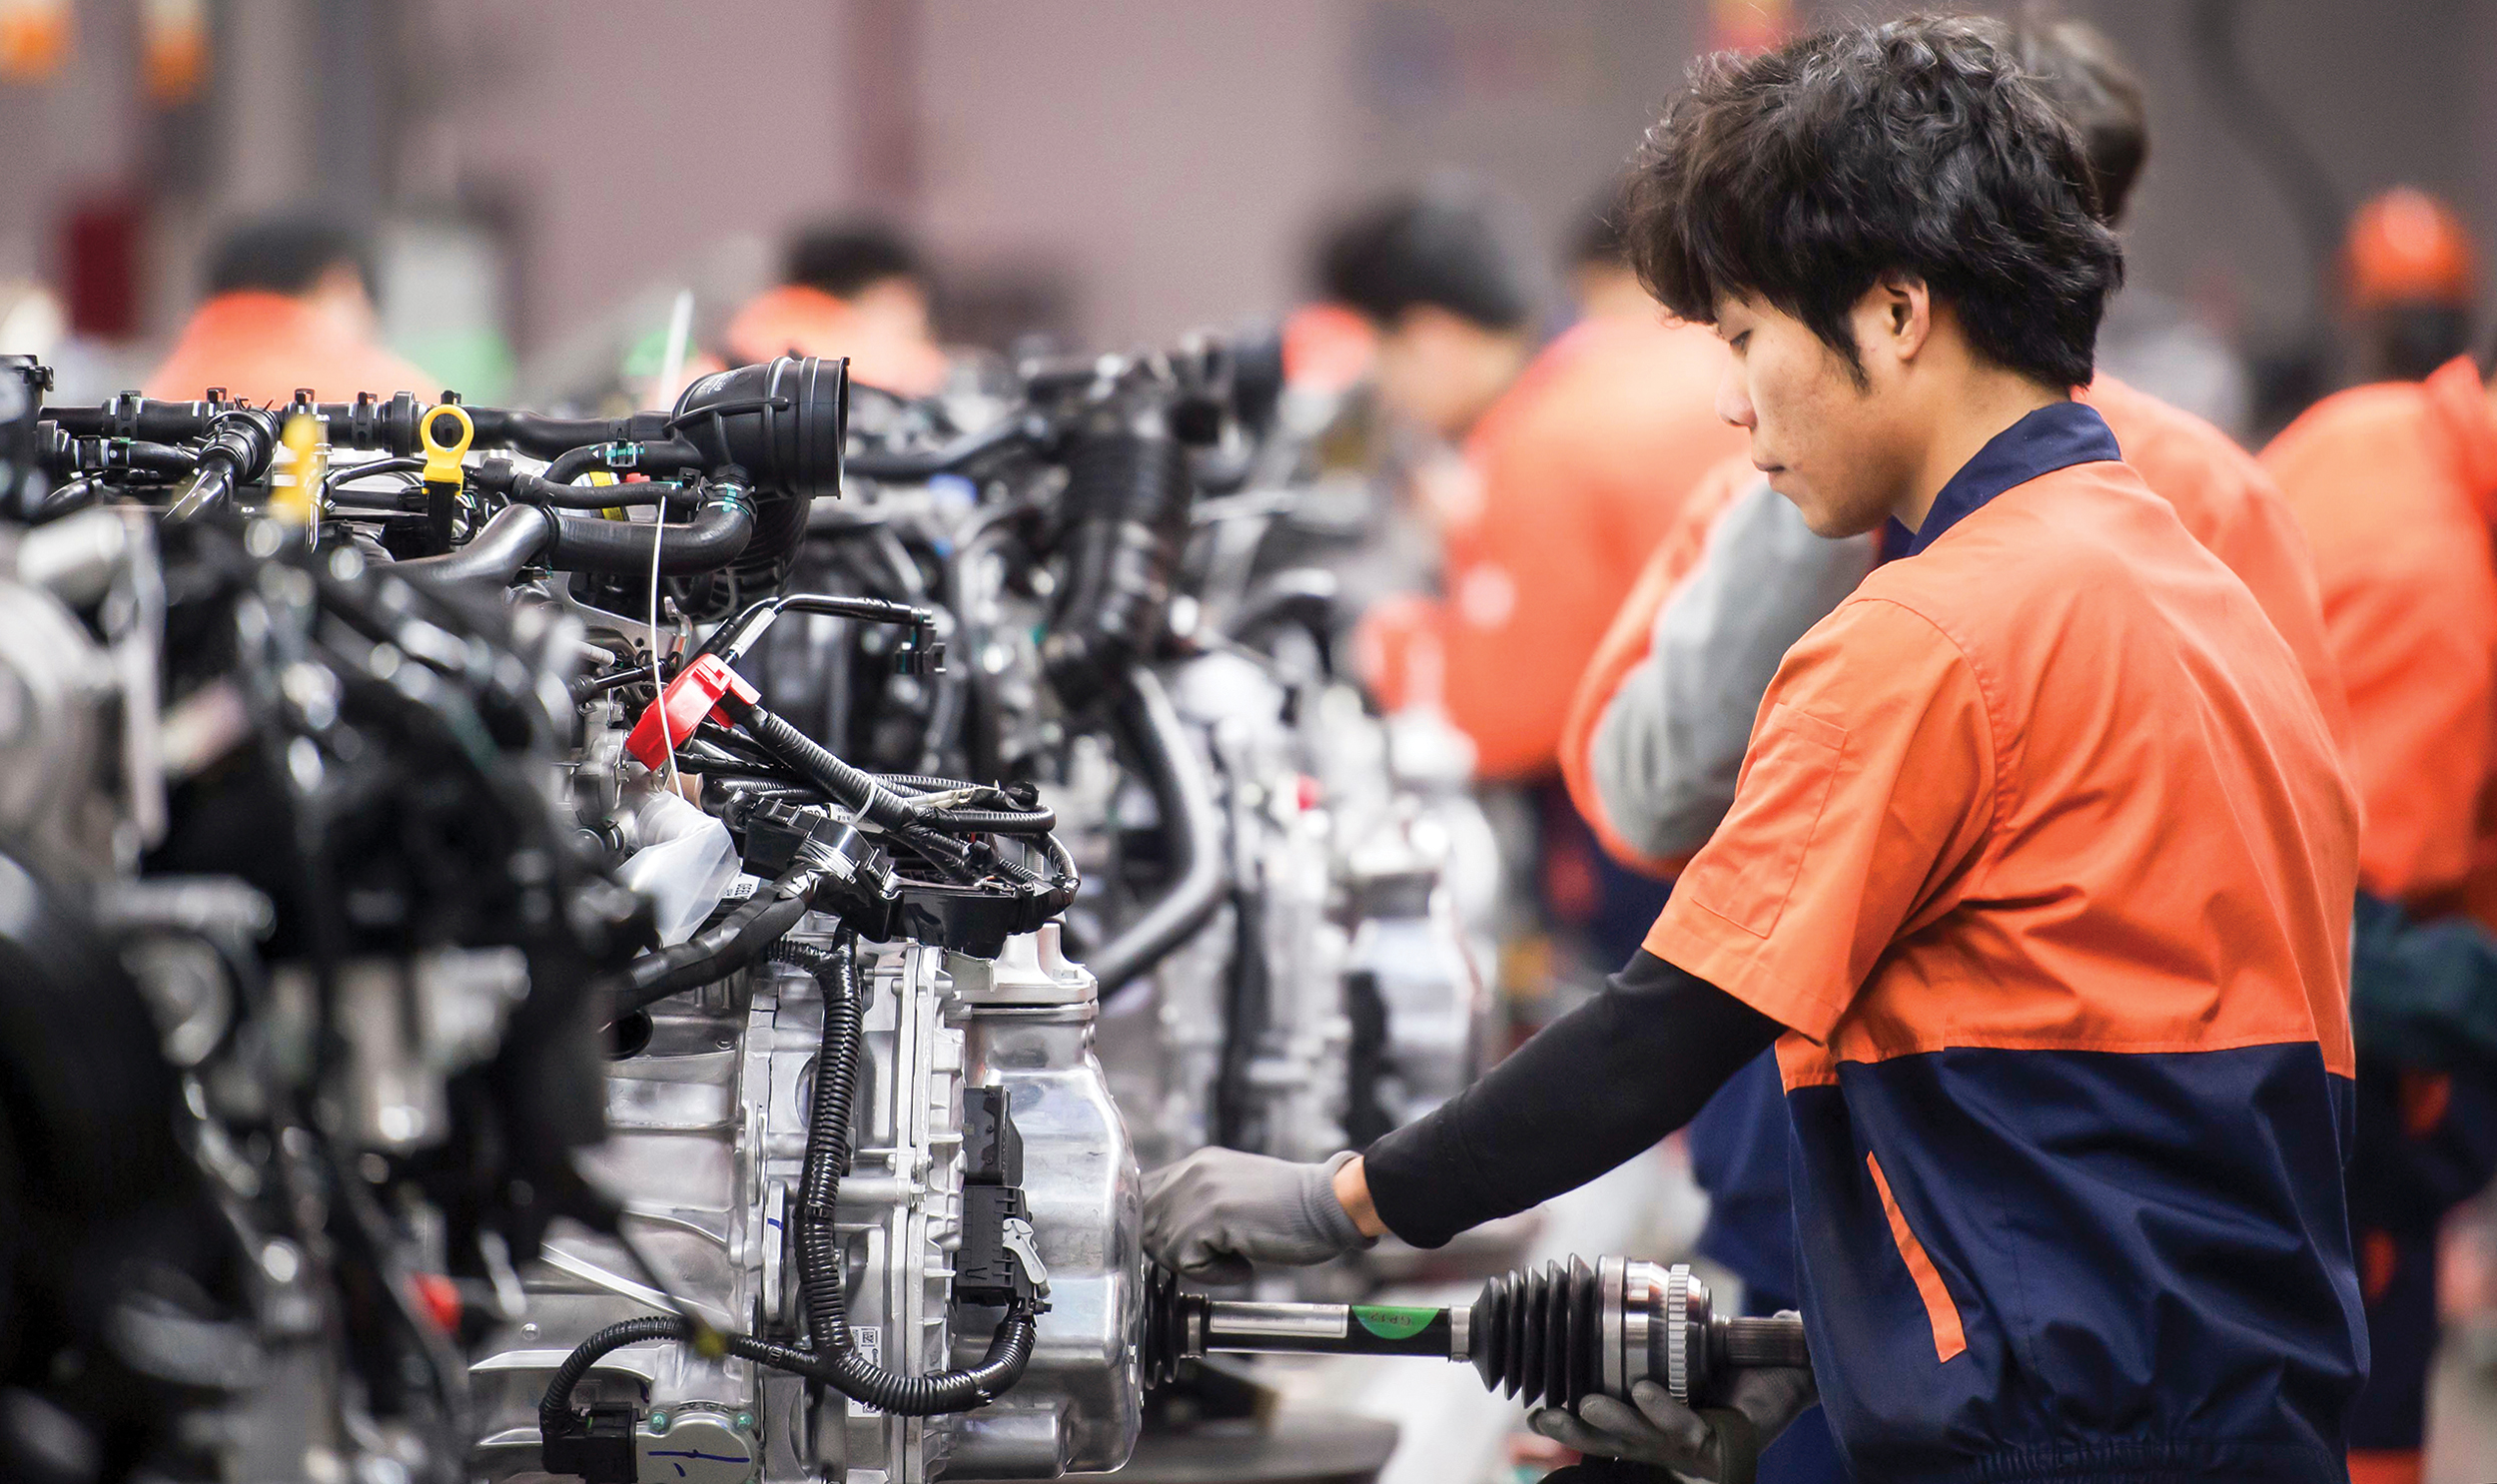 Assembly plant workers assemble engines at Geely Automobile Manufacturing Plant